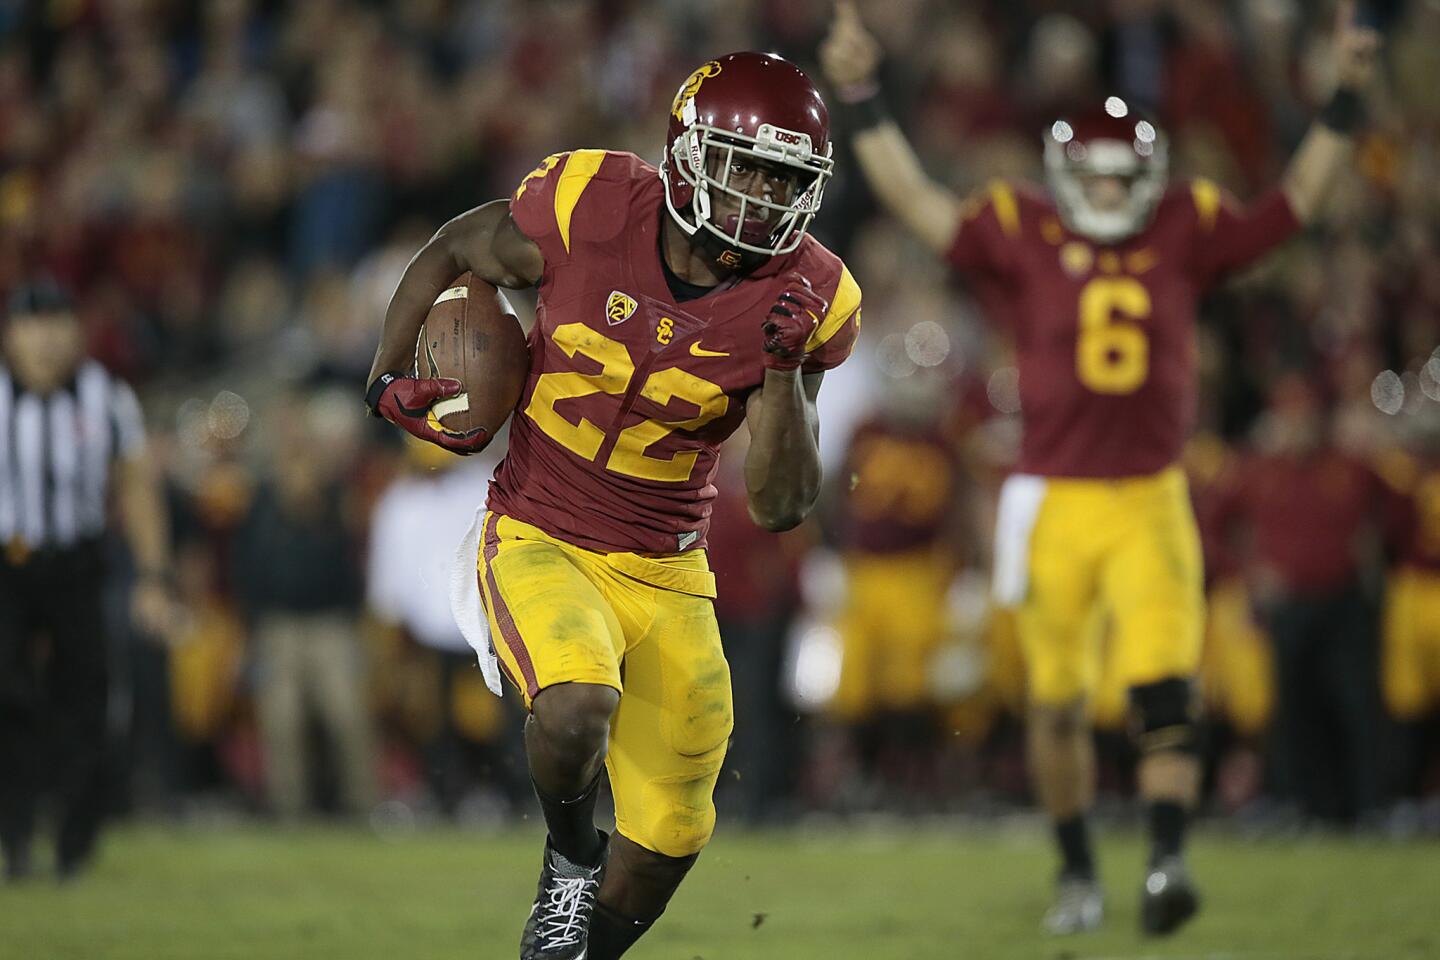 USC doesn't want to look past Colorado, or the cold weather